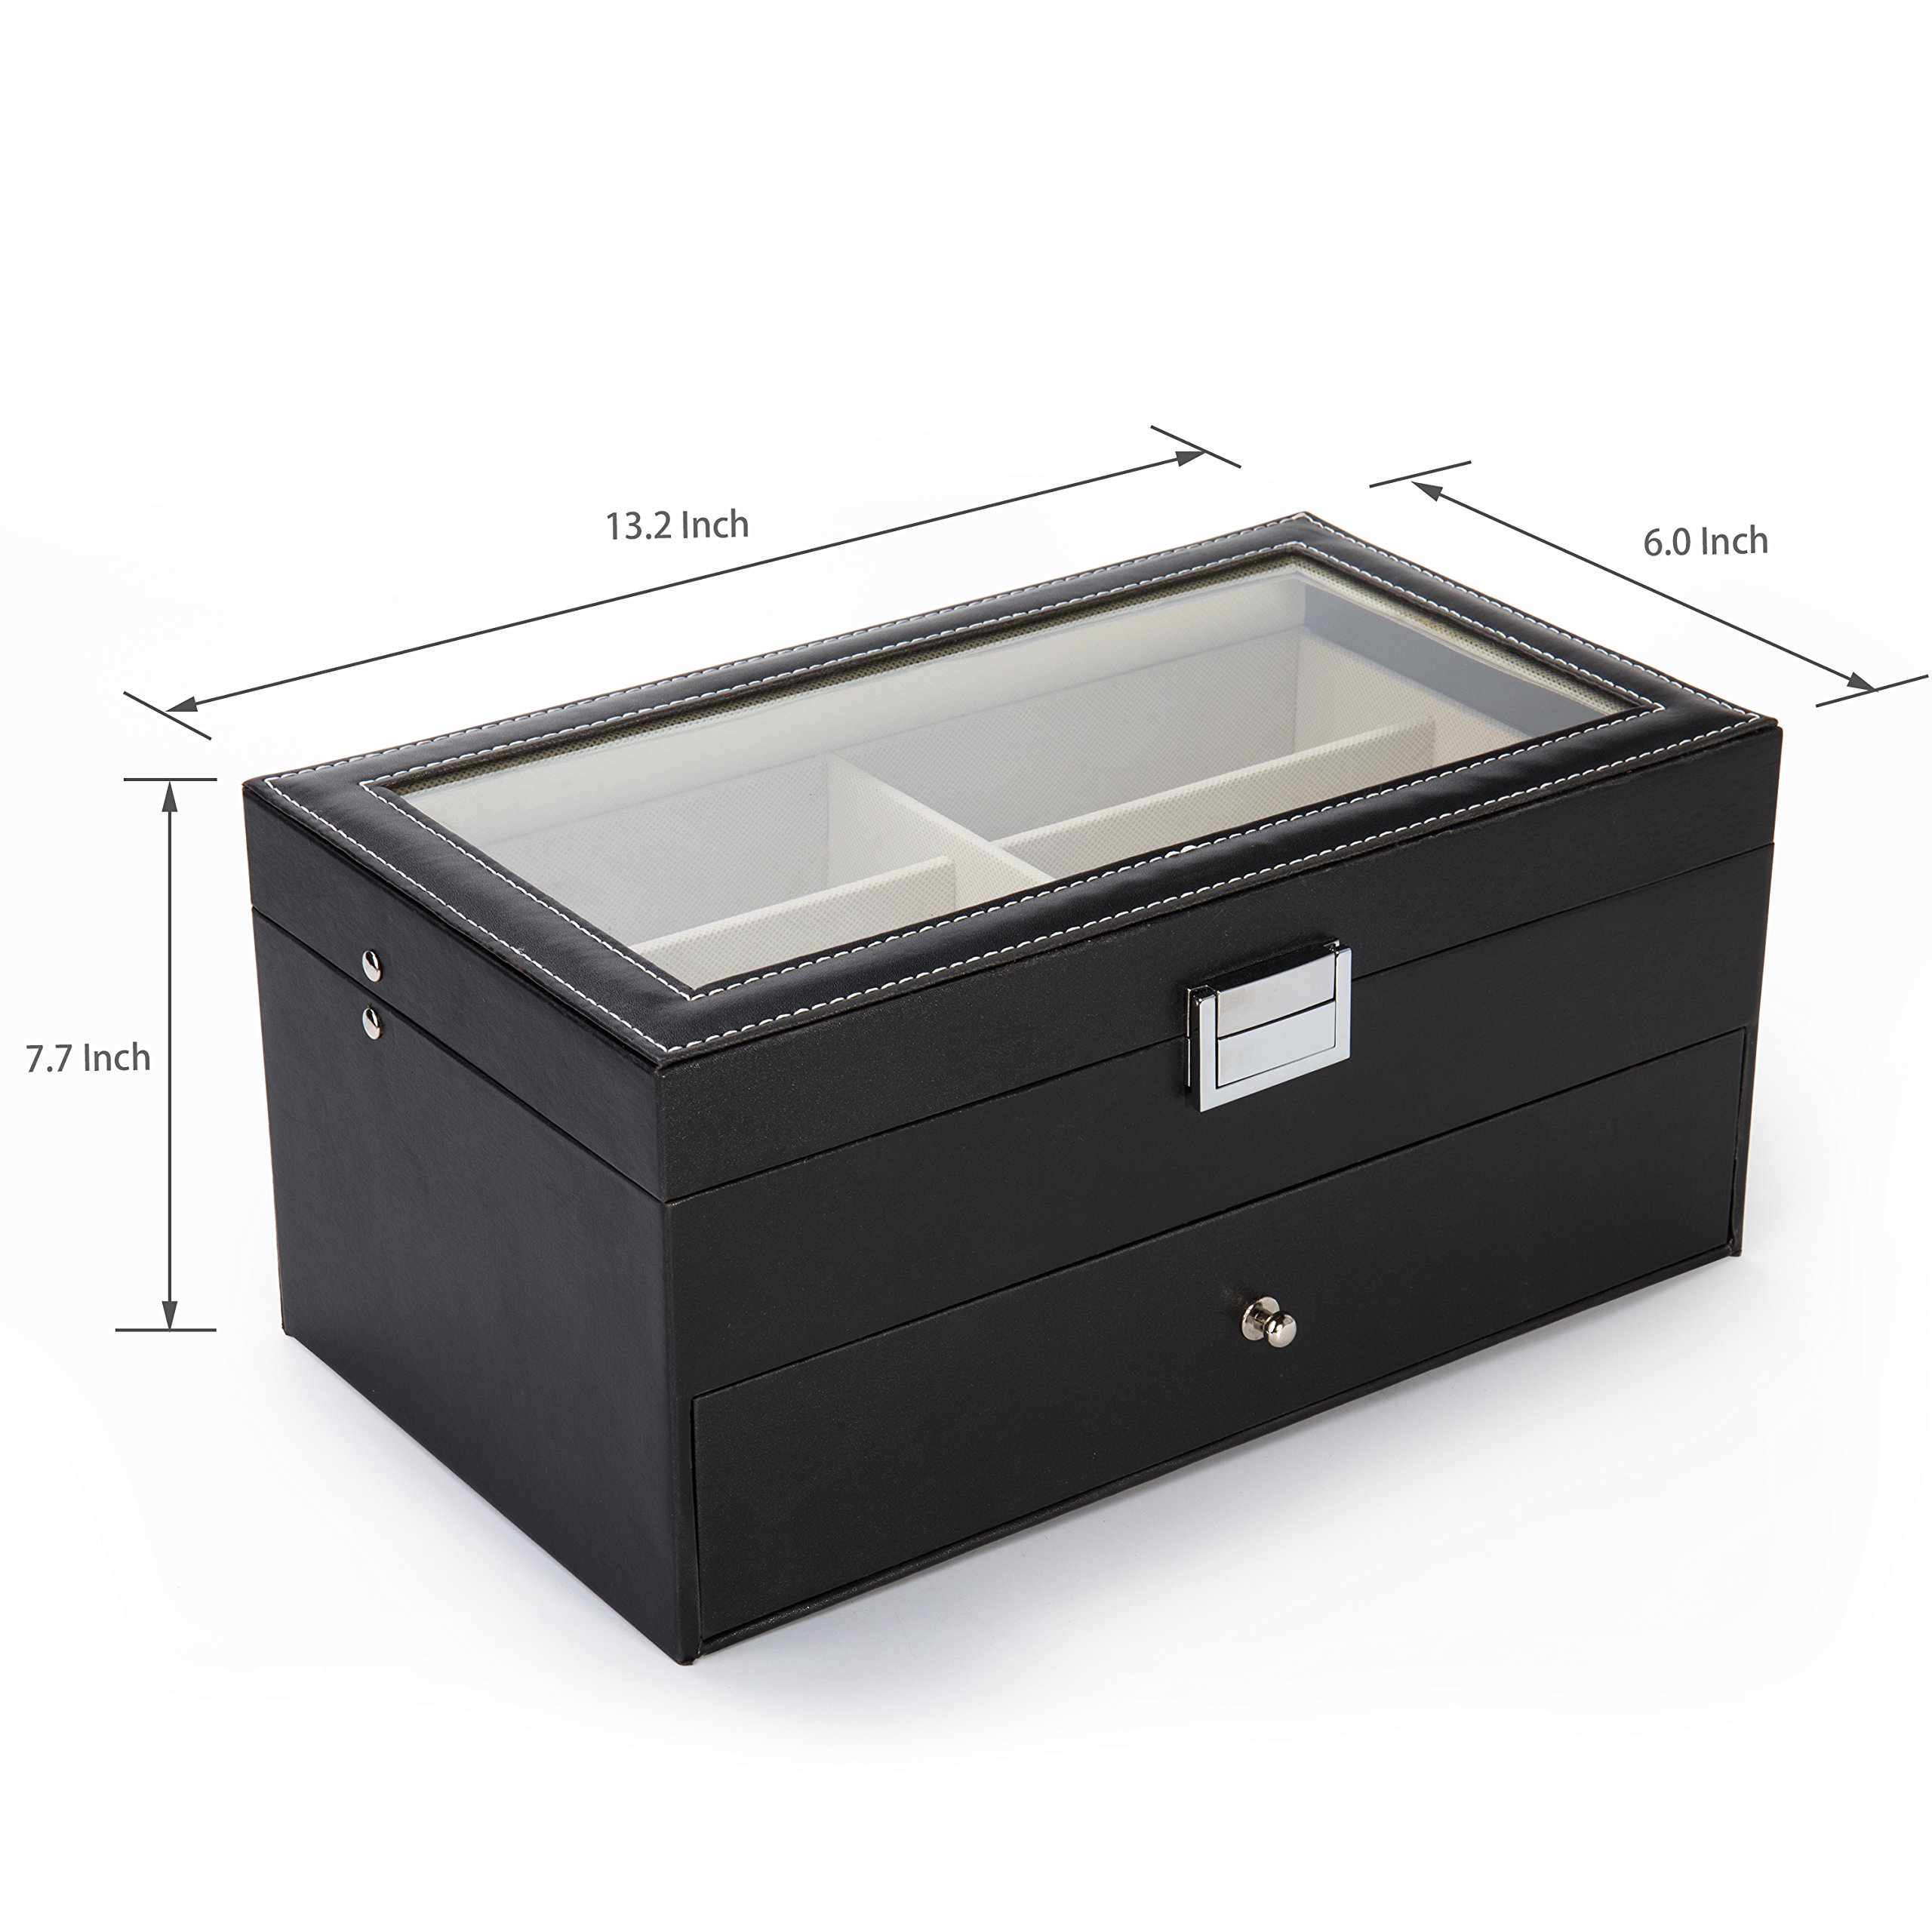 MyGift Deluxe Black Sunglass Storage Case - 12 Slot Eyewear Display Box with Glass Lid and Leatherette Trim